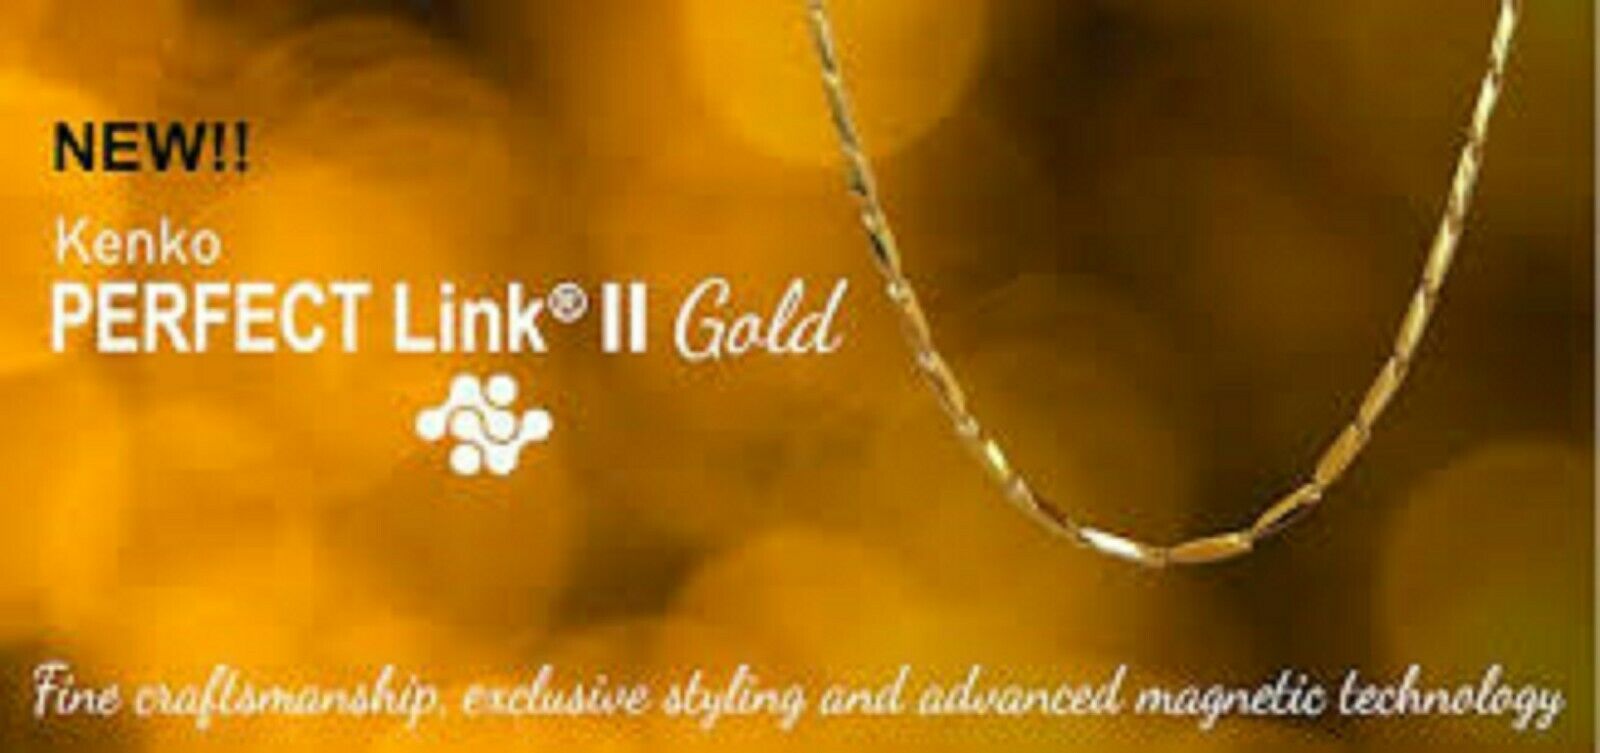 Nikken Kenko Perfect Link™ II Gold Stainless Steel Magnetic Necklace New